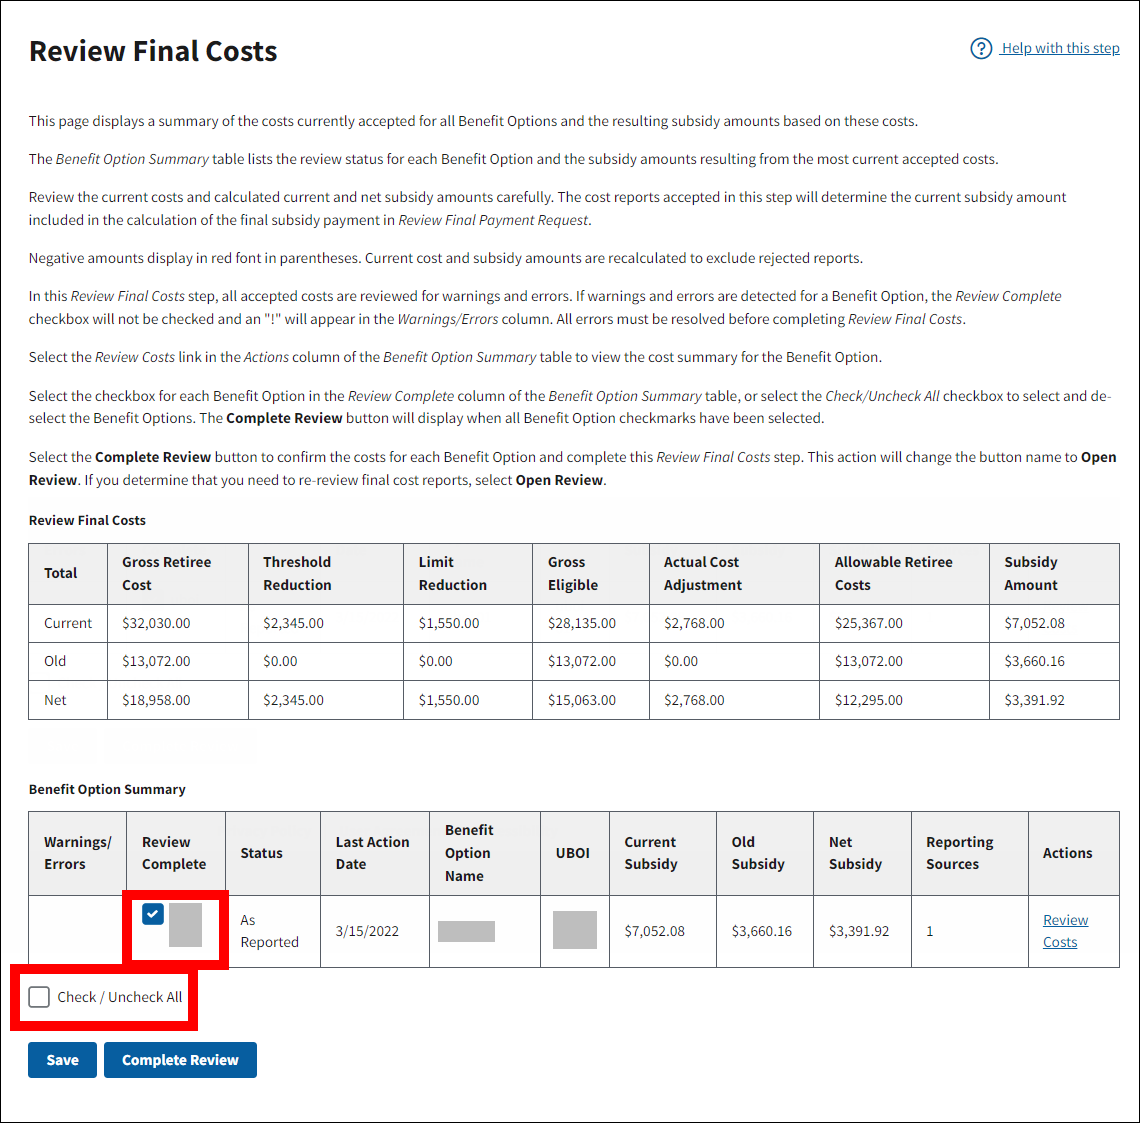 Review Final Costs page with sample data. Review Complete and Check/Uncheck All checkboxes are highlighted.